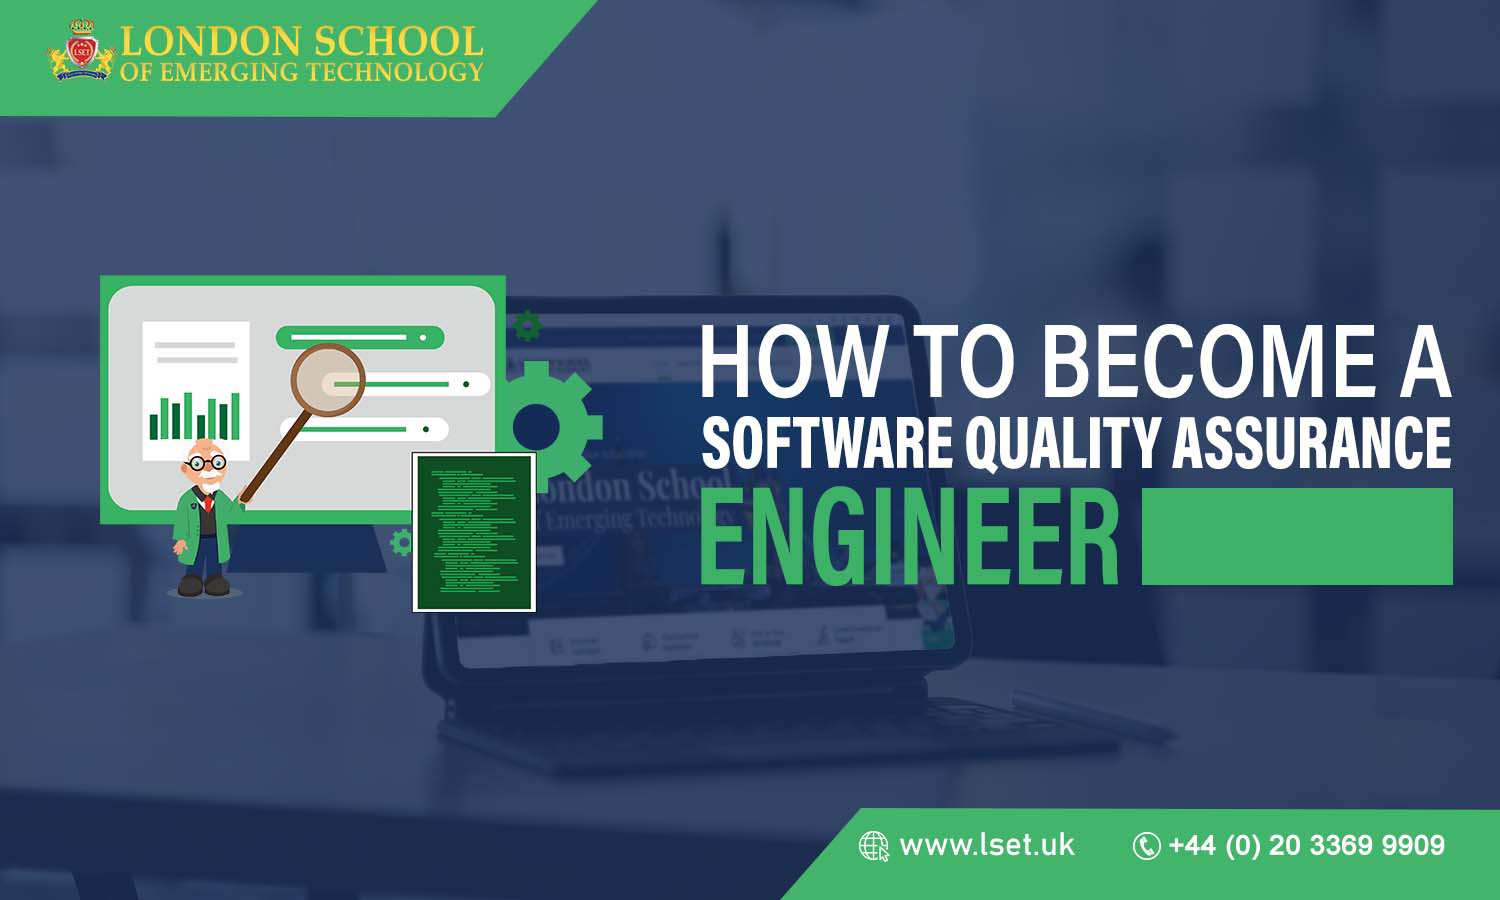 How to Become a Software Quality Assurance Engineer